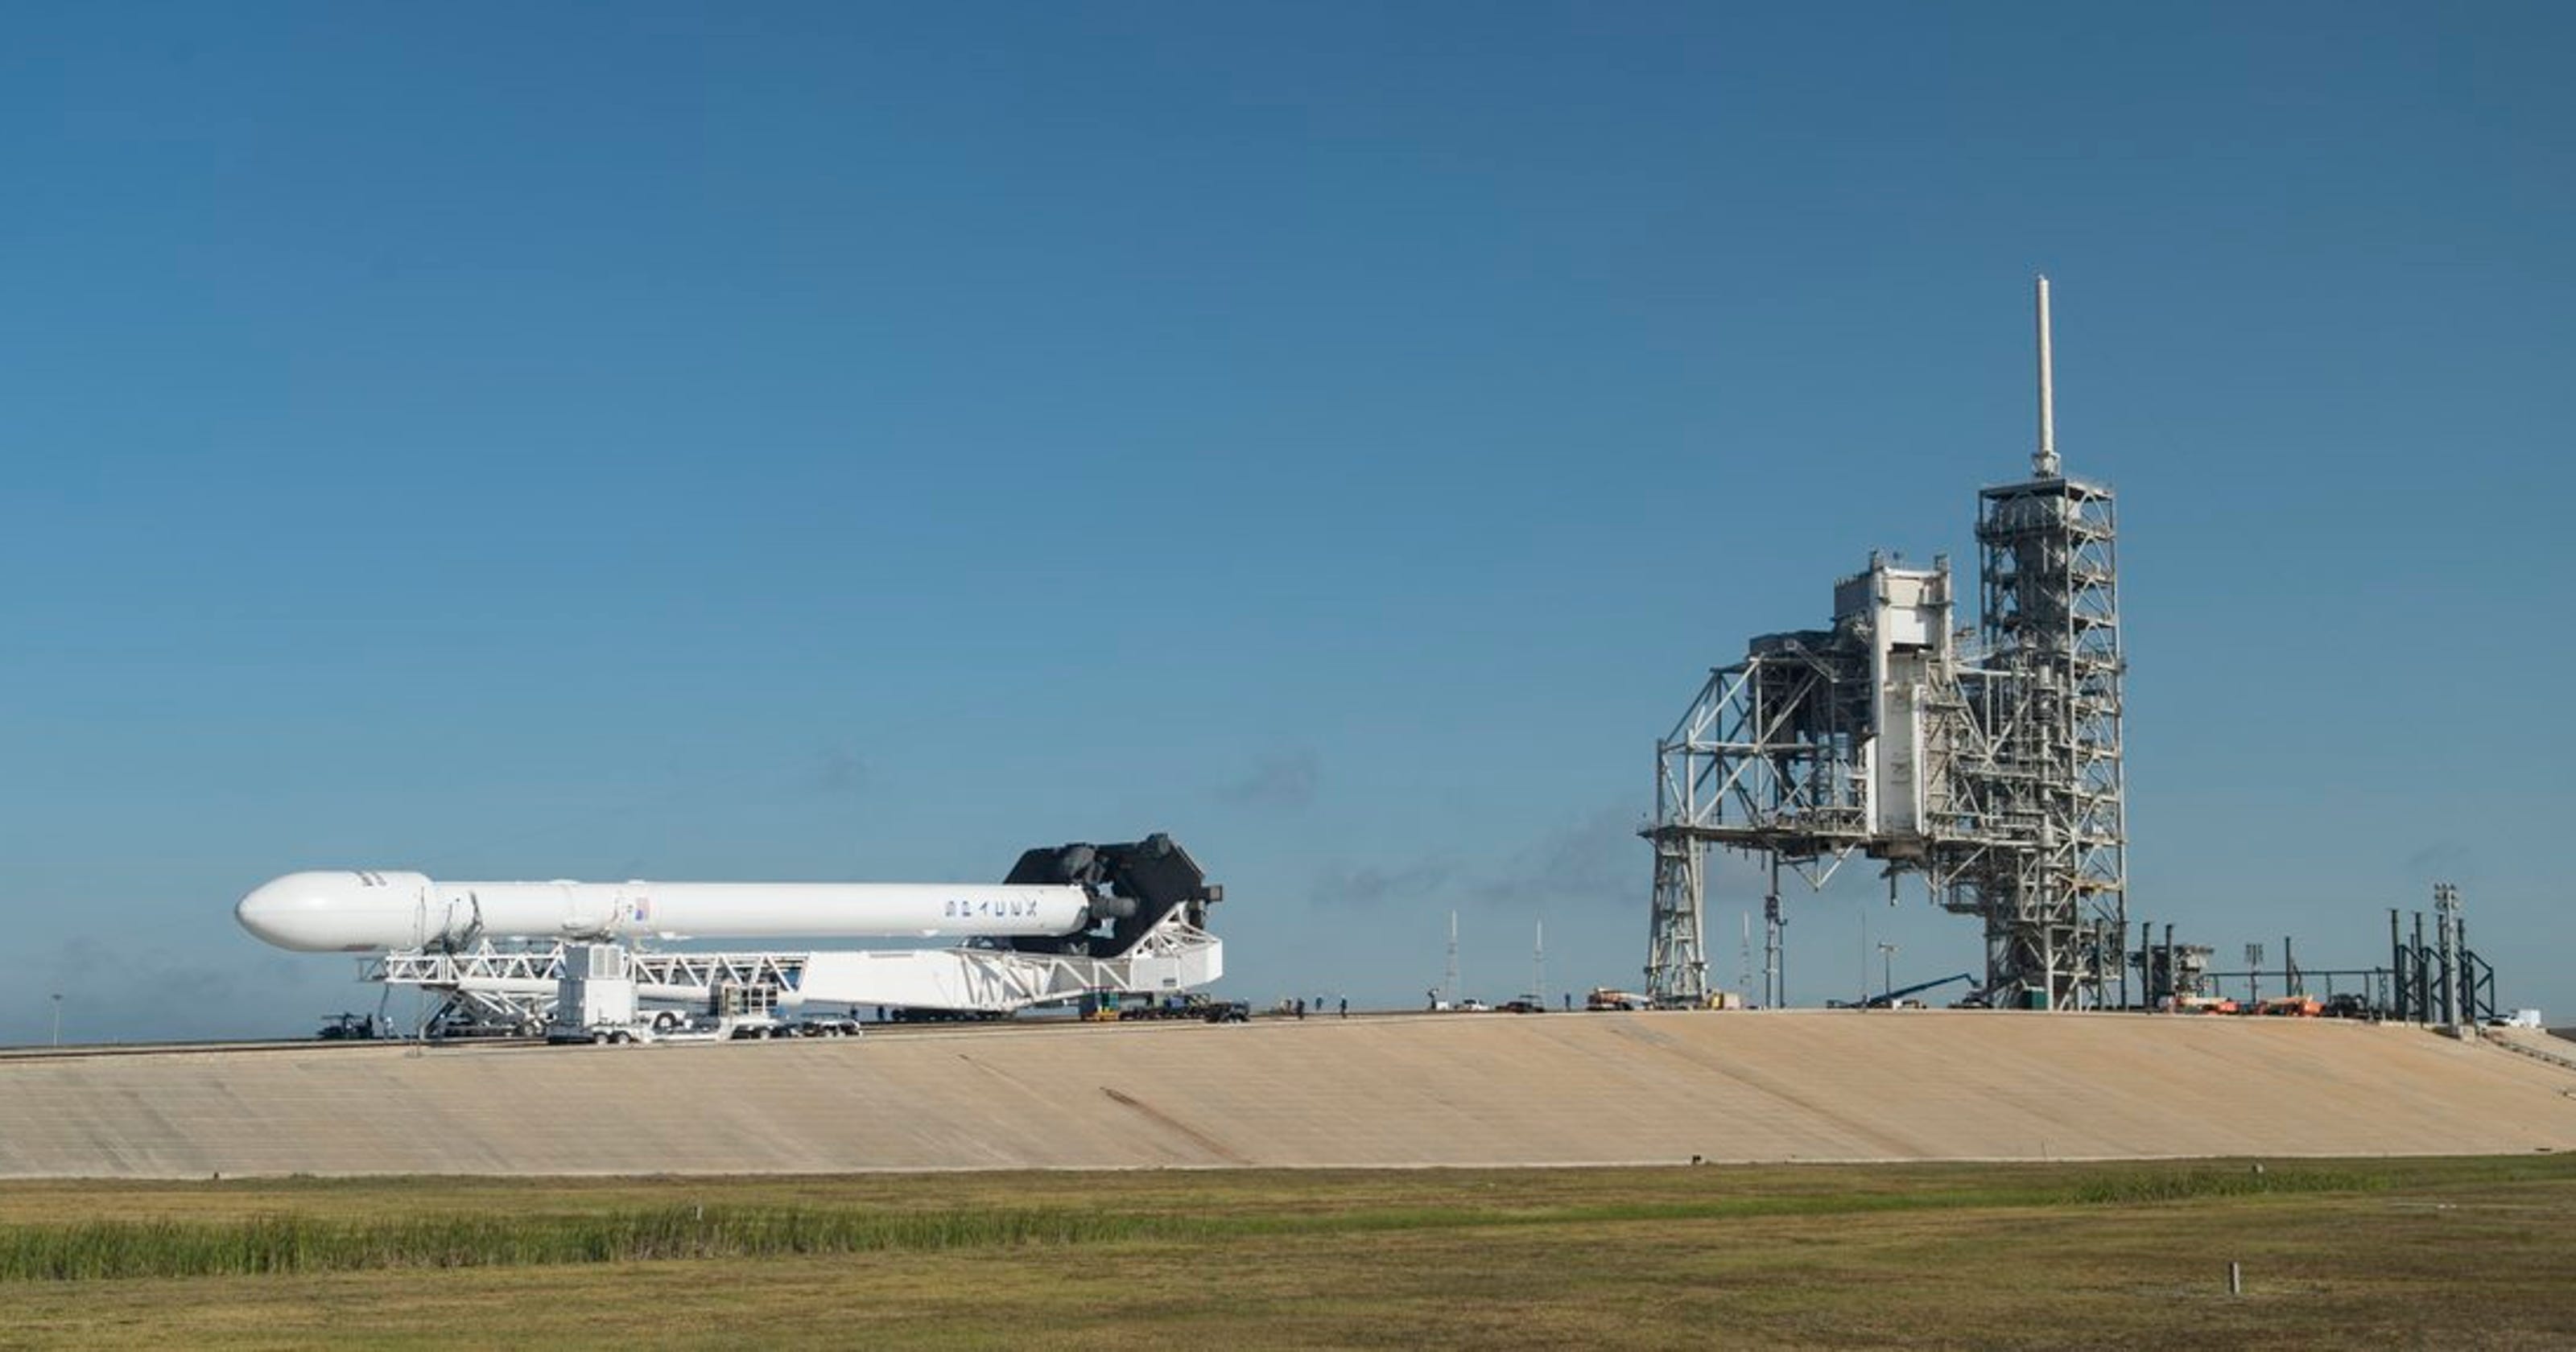 How to watch SpaceX launch from historic pad 39A3200 x 1680